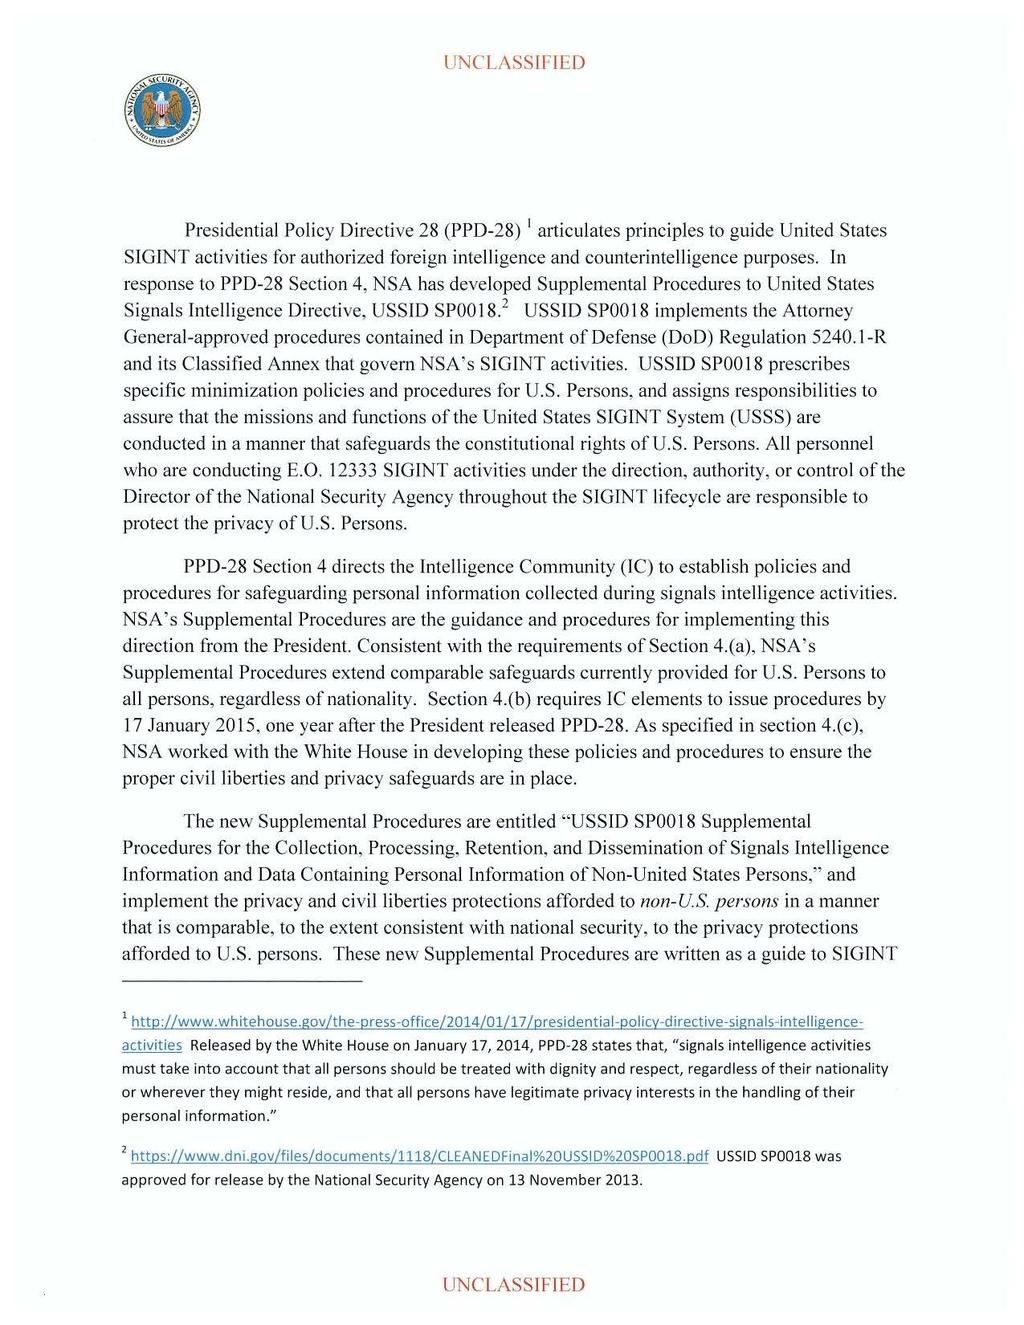 UNCLASSIFIED Presidential Policy Directive 28 (PPD-28) 1 articulates principles to guide United States SIGINT activities for authorized foreign intelligence and counterintelligence purposes.